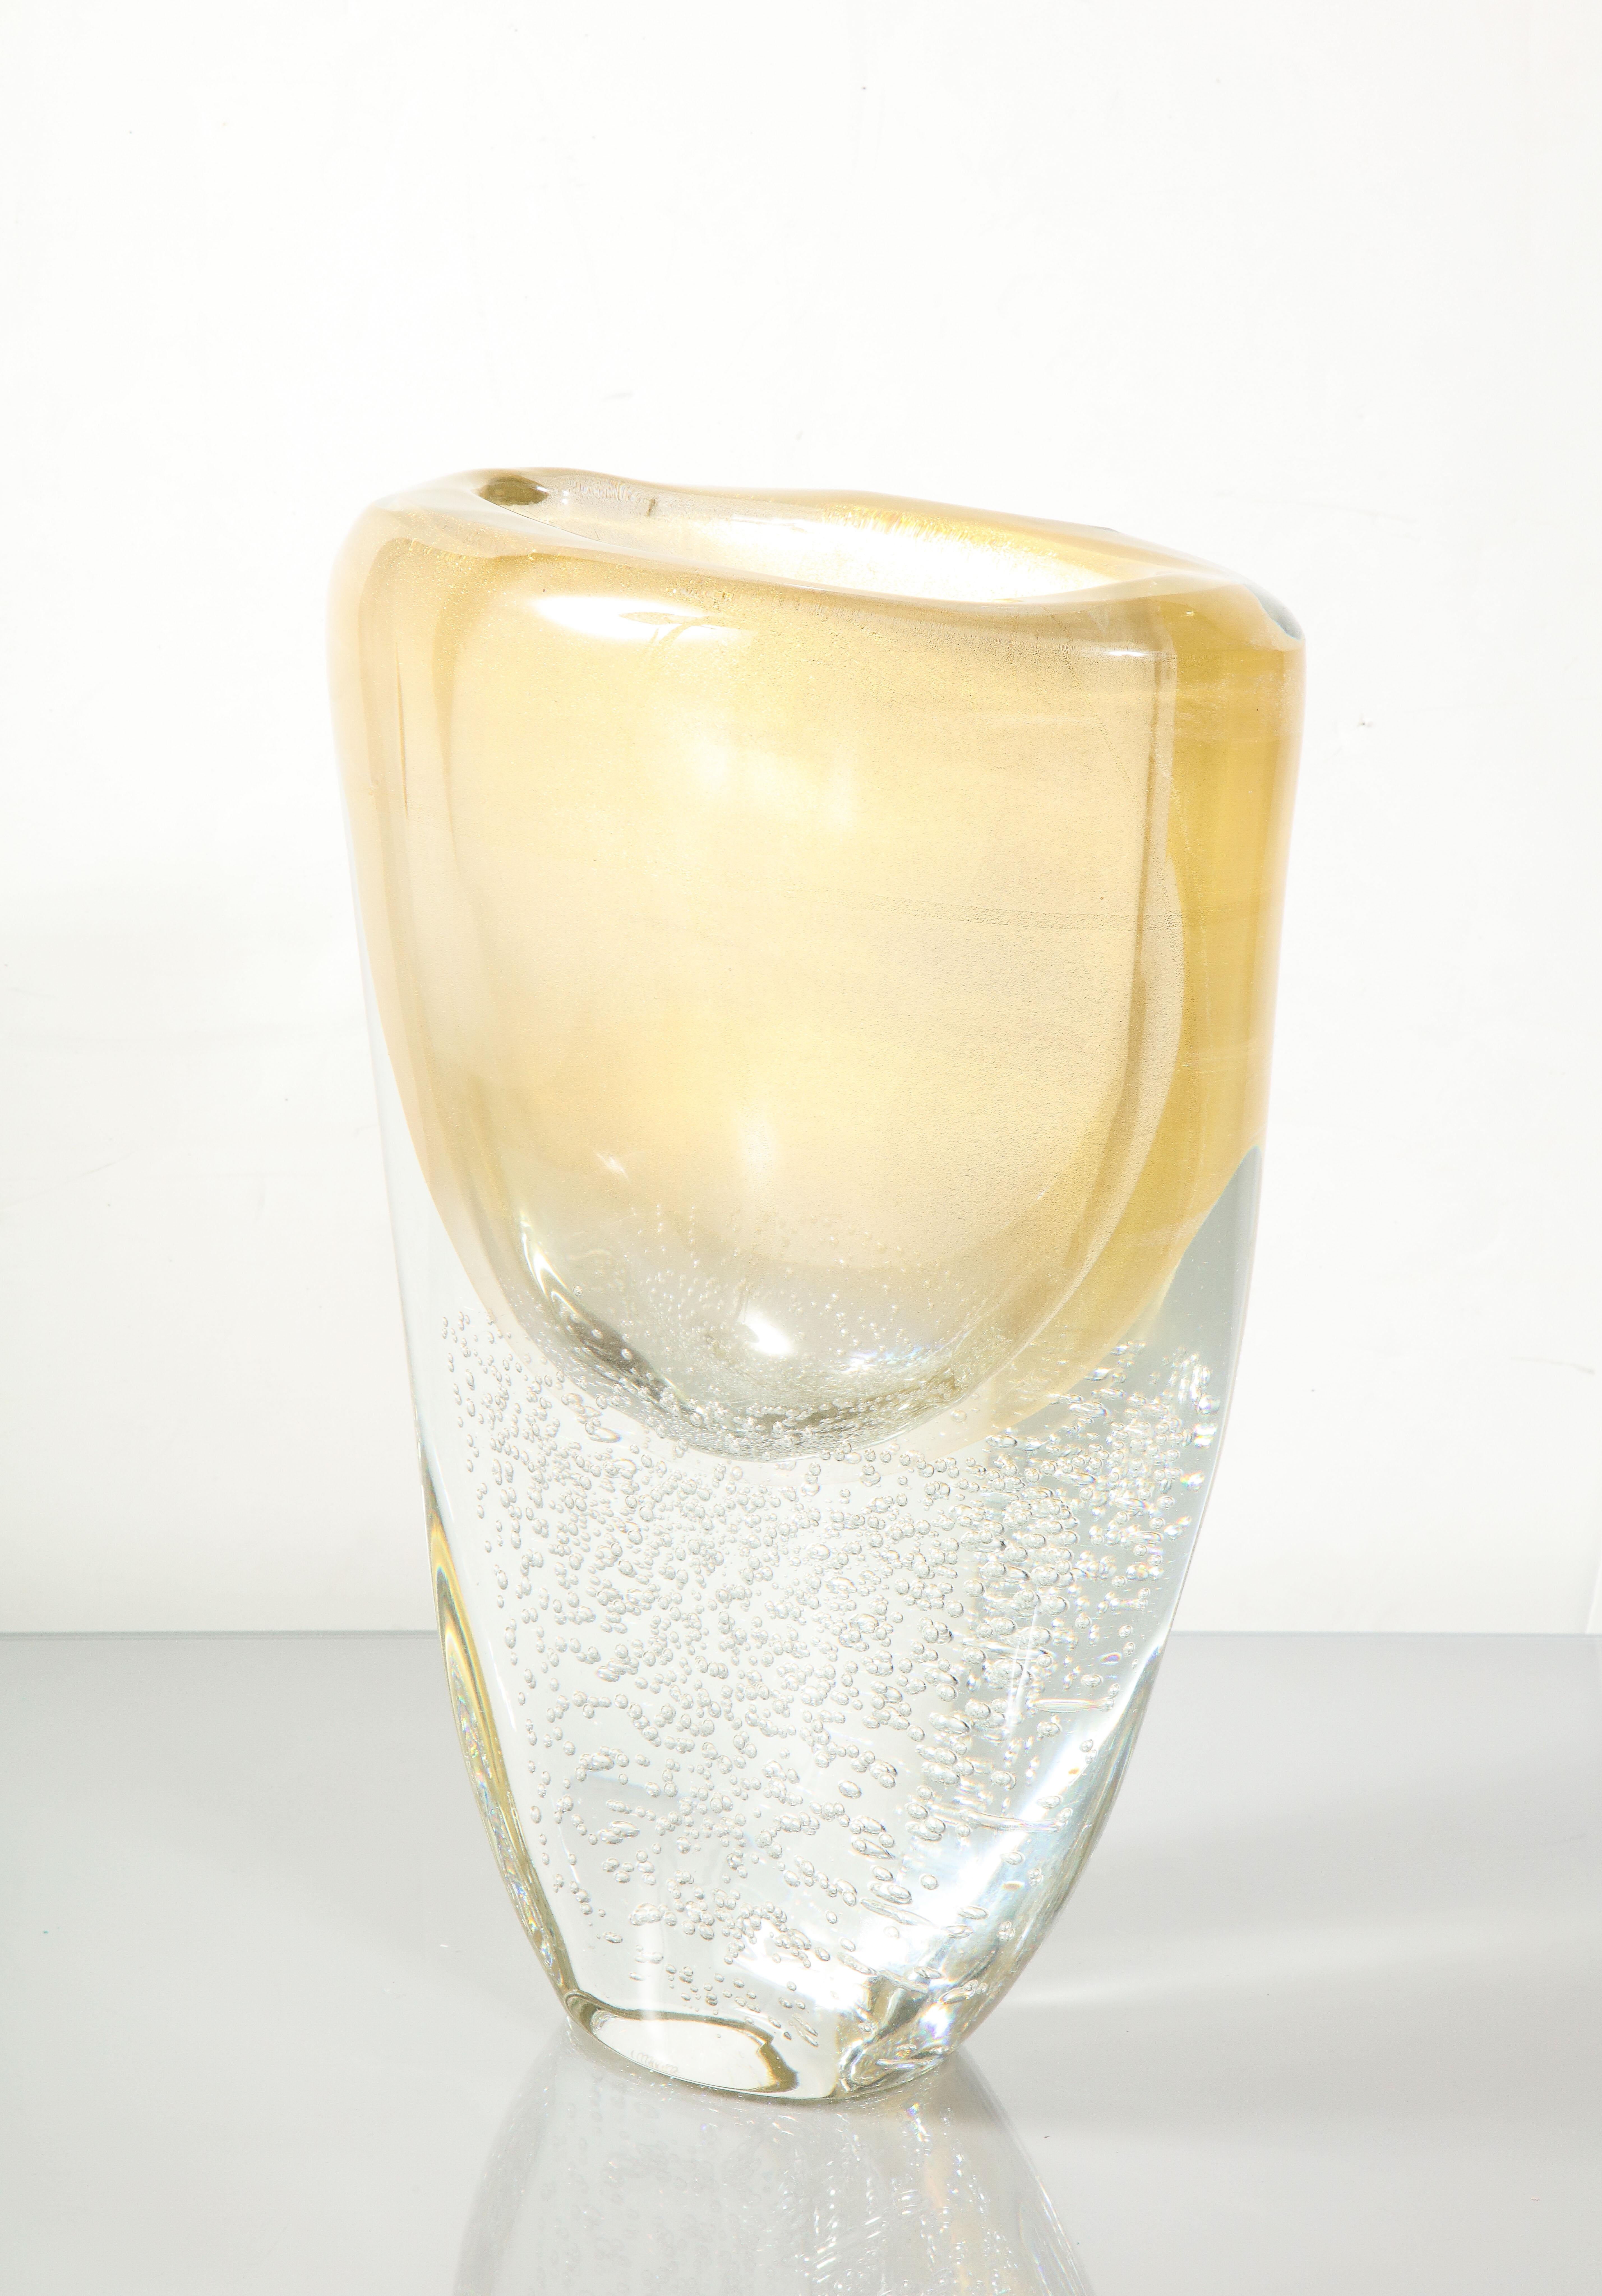 Tall Sommerso Italian Murano glass vase with seedy air bubbles and 24 karat gold immersion. Size, shape and color of each vase may slightly vary due to a nature of hand-blown, handmade process. Availability of this item varies. Please inquire with